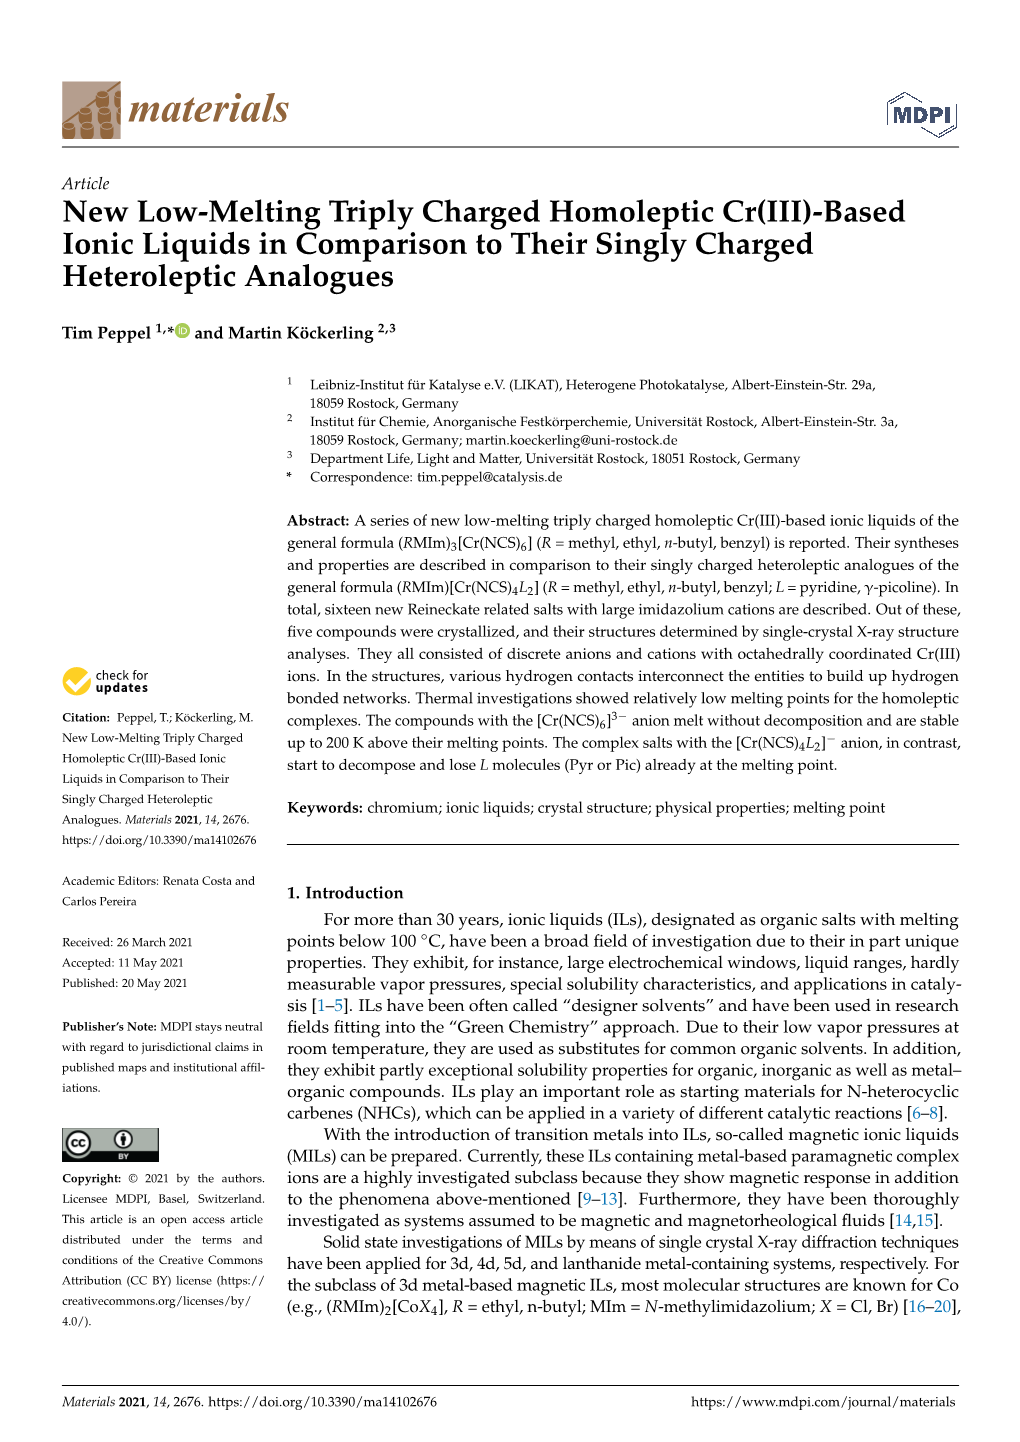 Based Ionic Liquids in Comparison to Their Singly Charged Heteroleptic Analogues